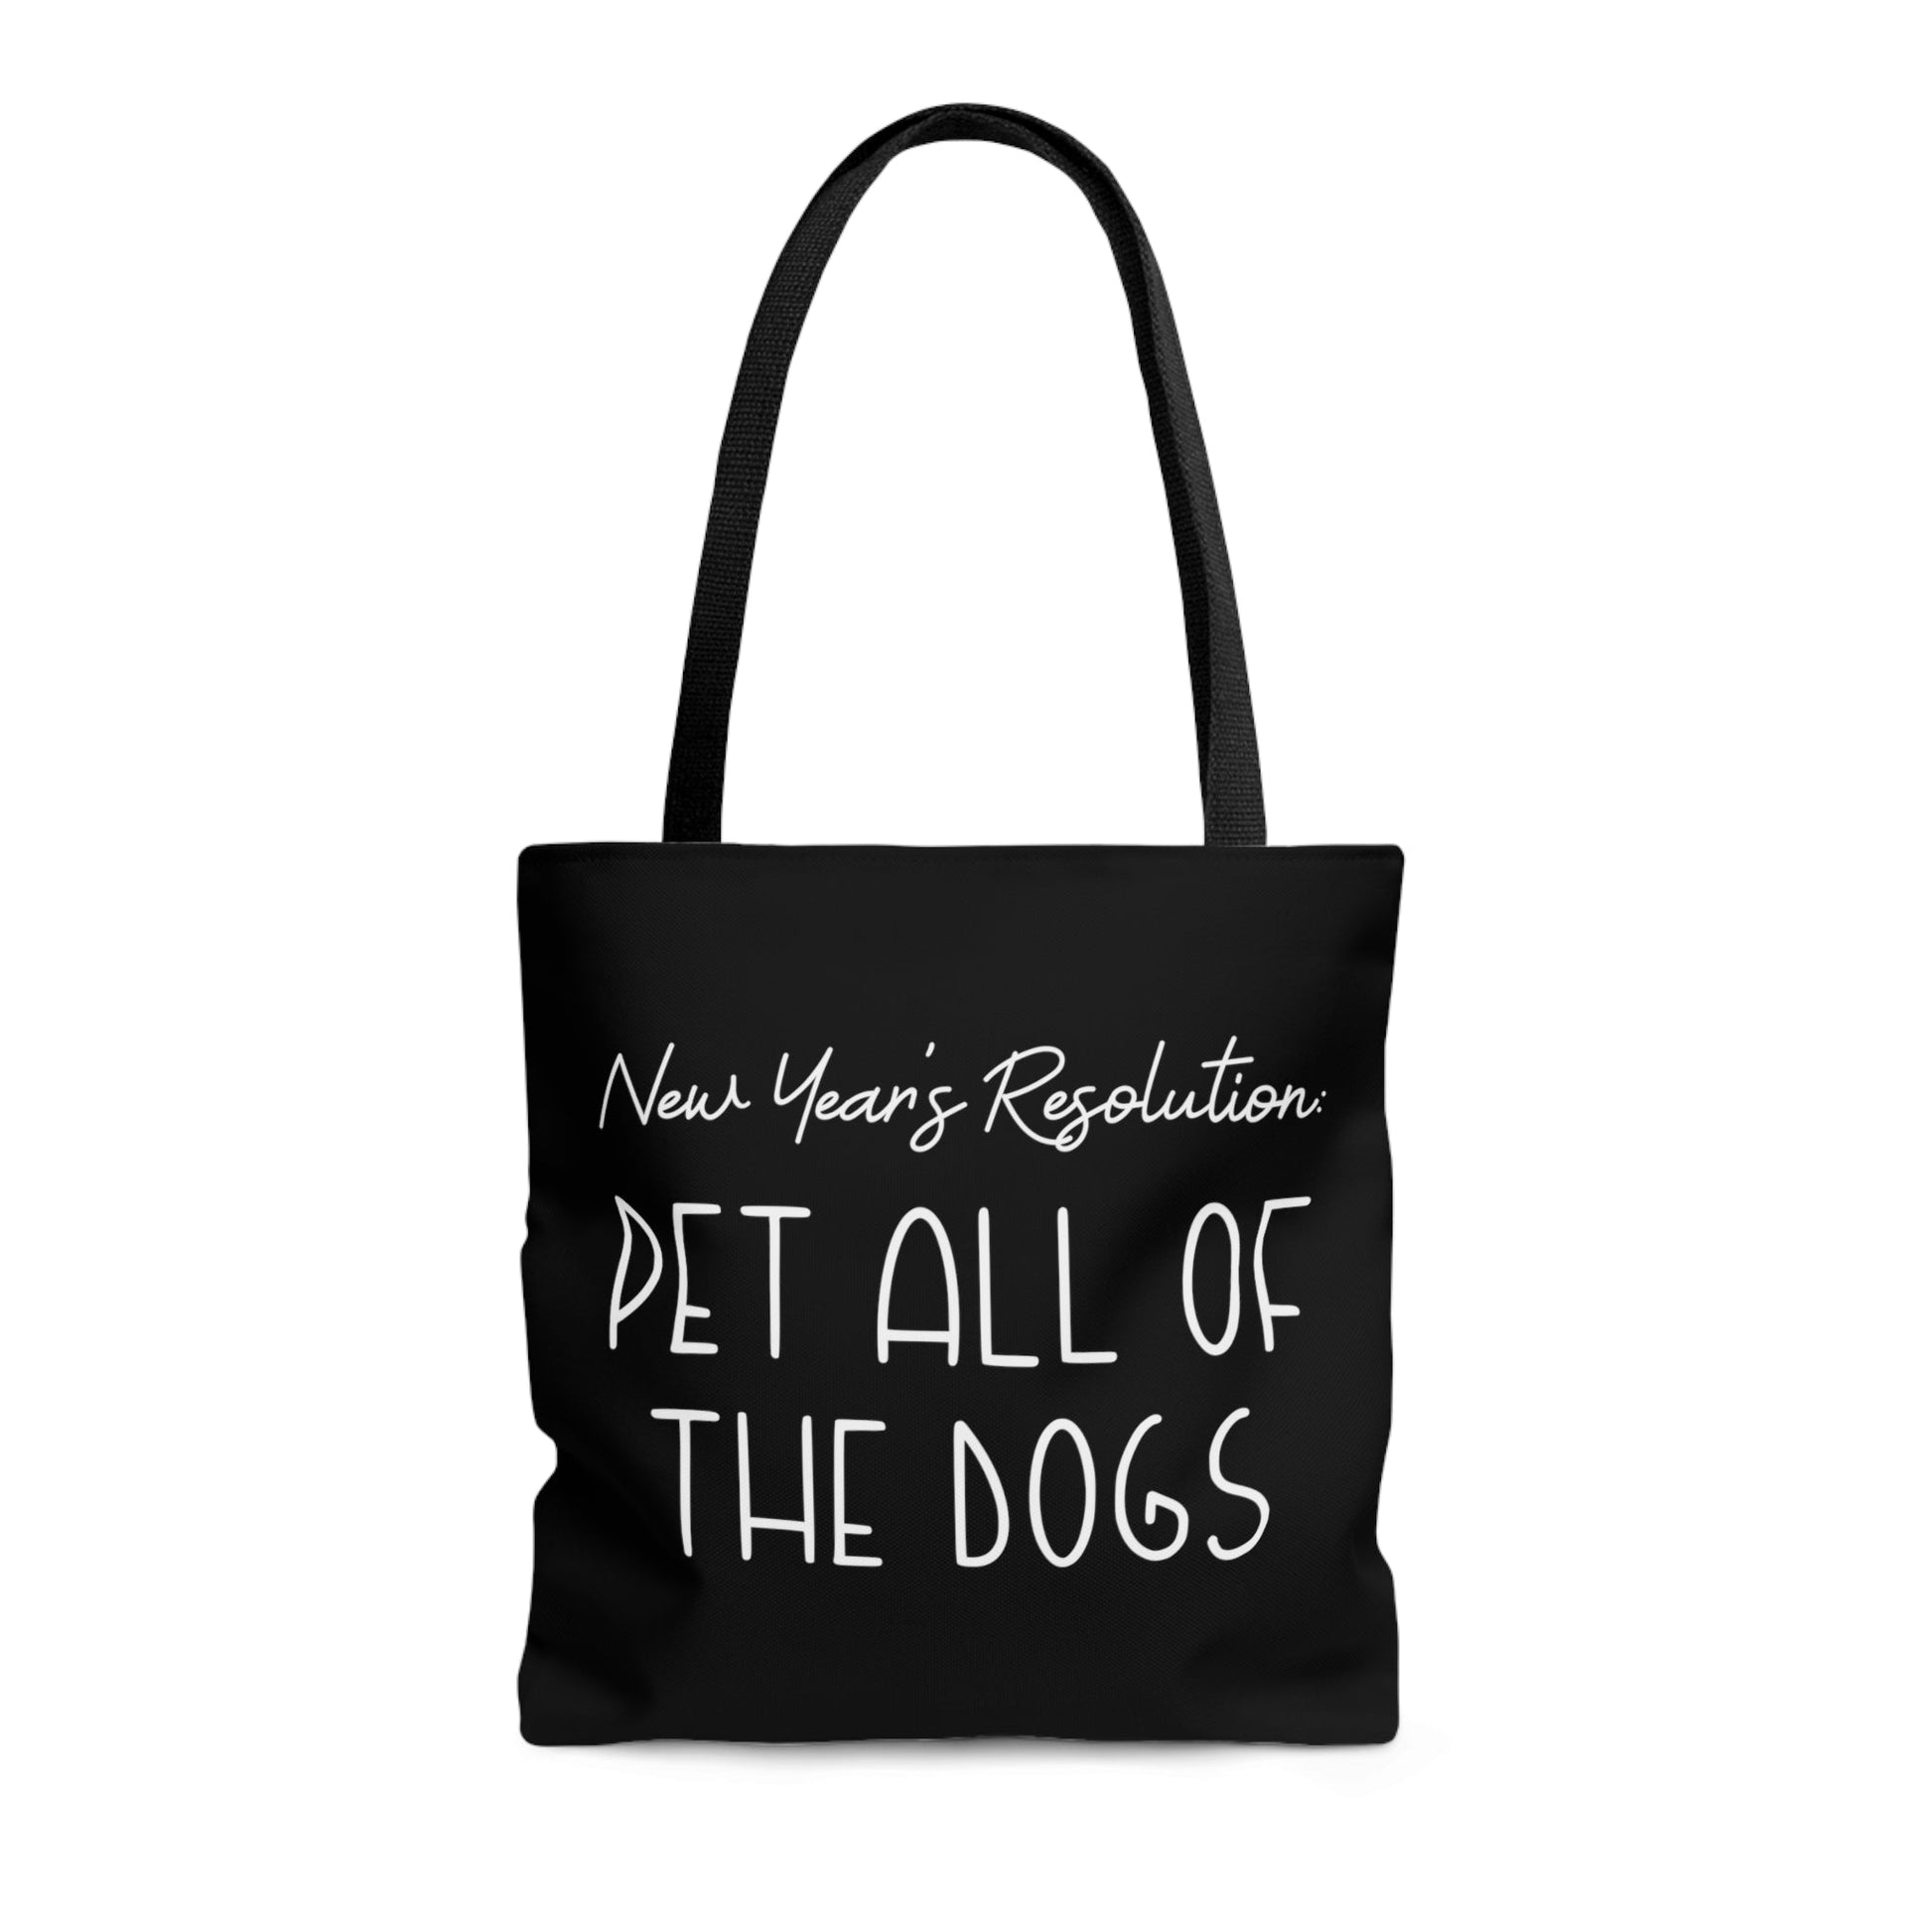 New Year's Resolution: Pet All Of The Dogs | Tote Bag - Detezi Designs-28317701430852147700